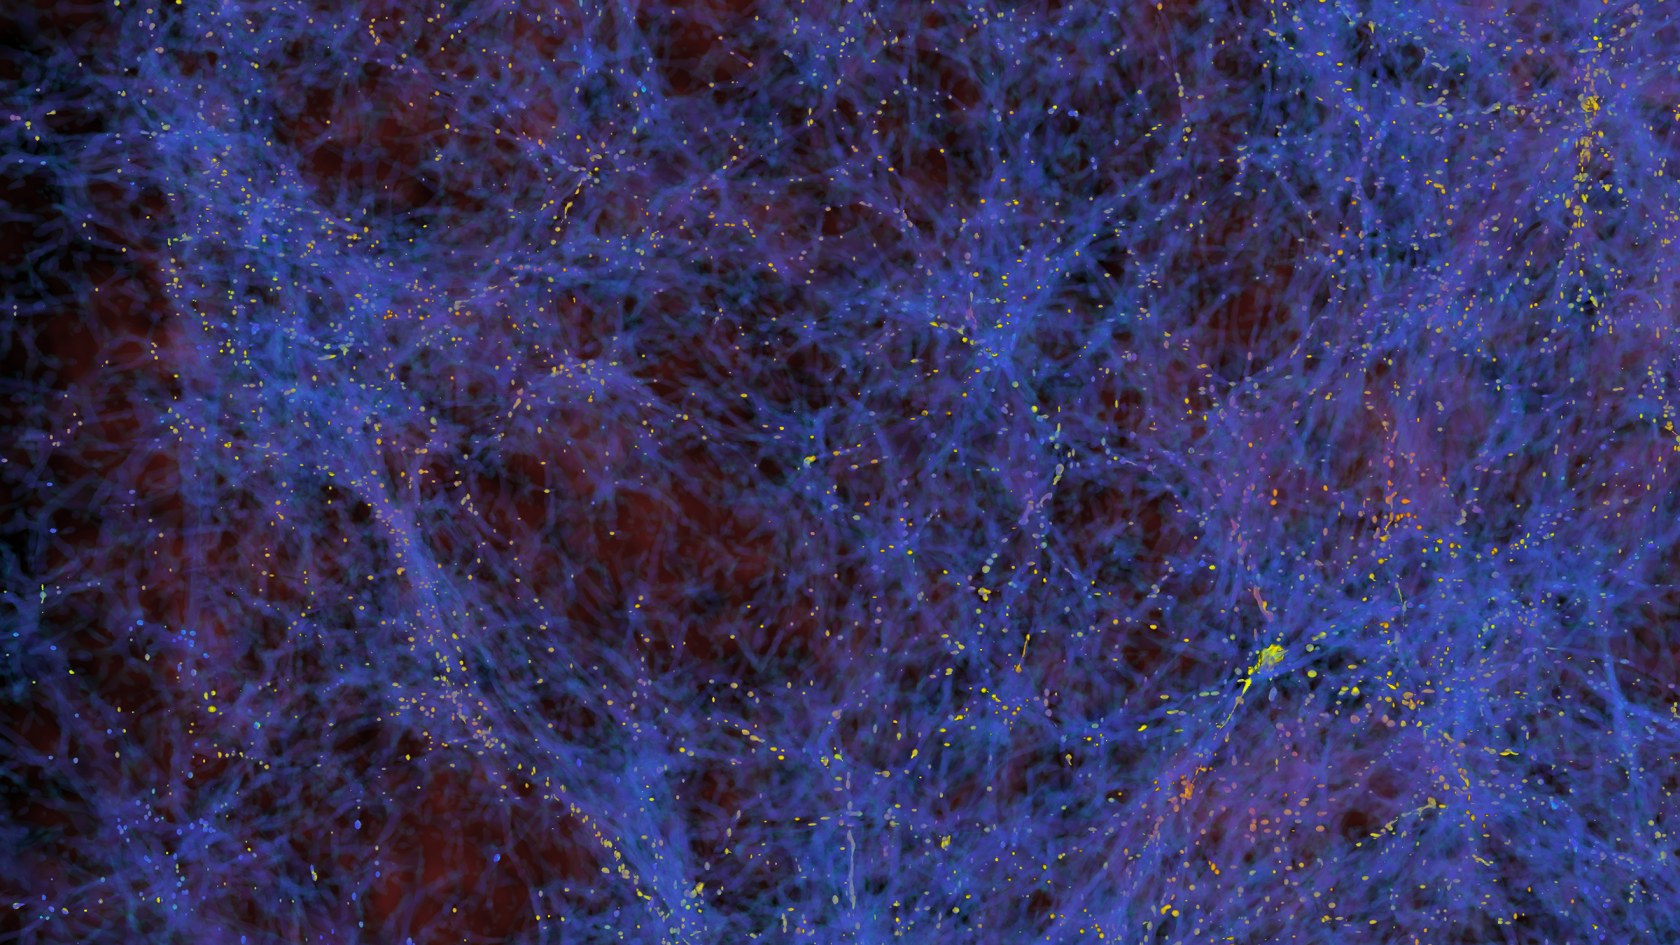 Scientists have come up with a new potential method for detecting dark matter